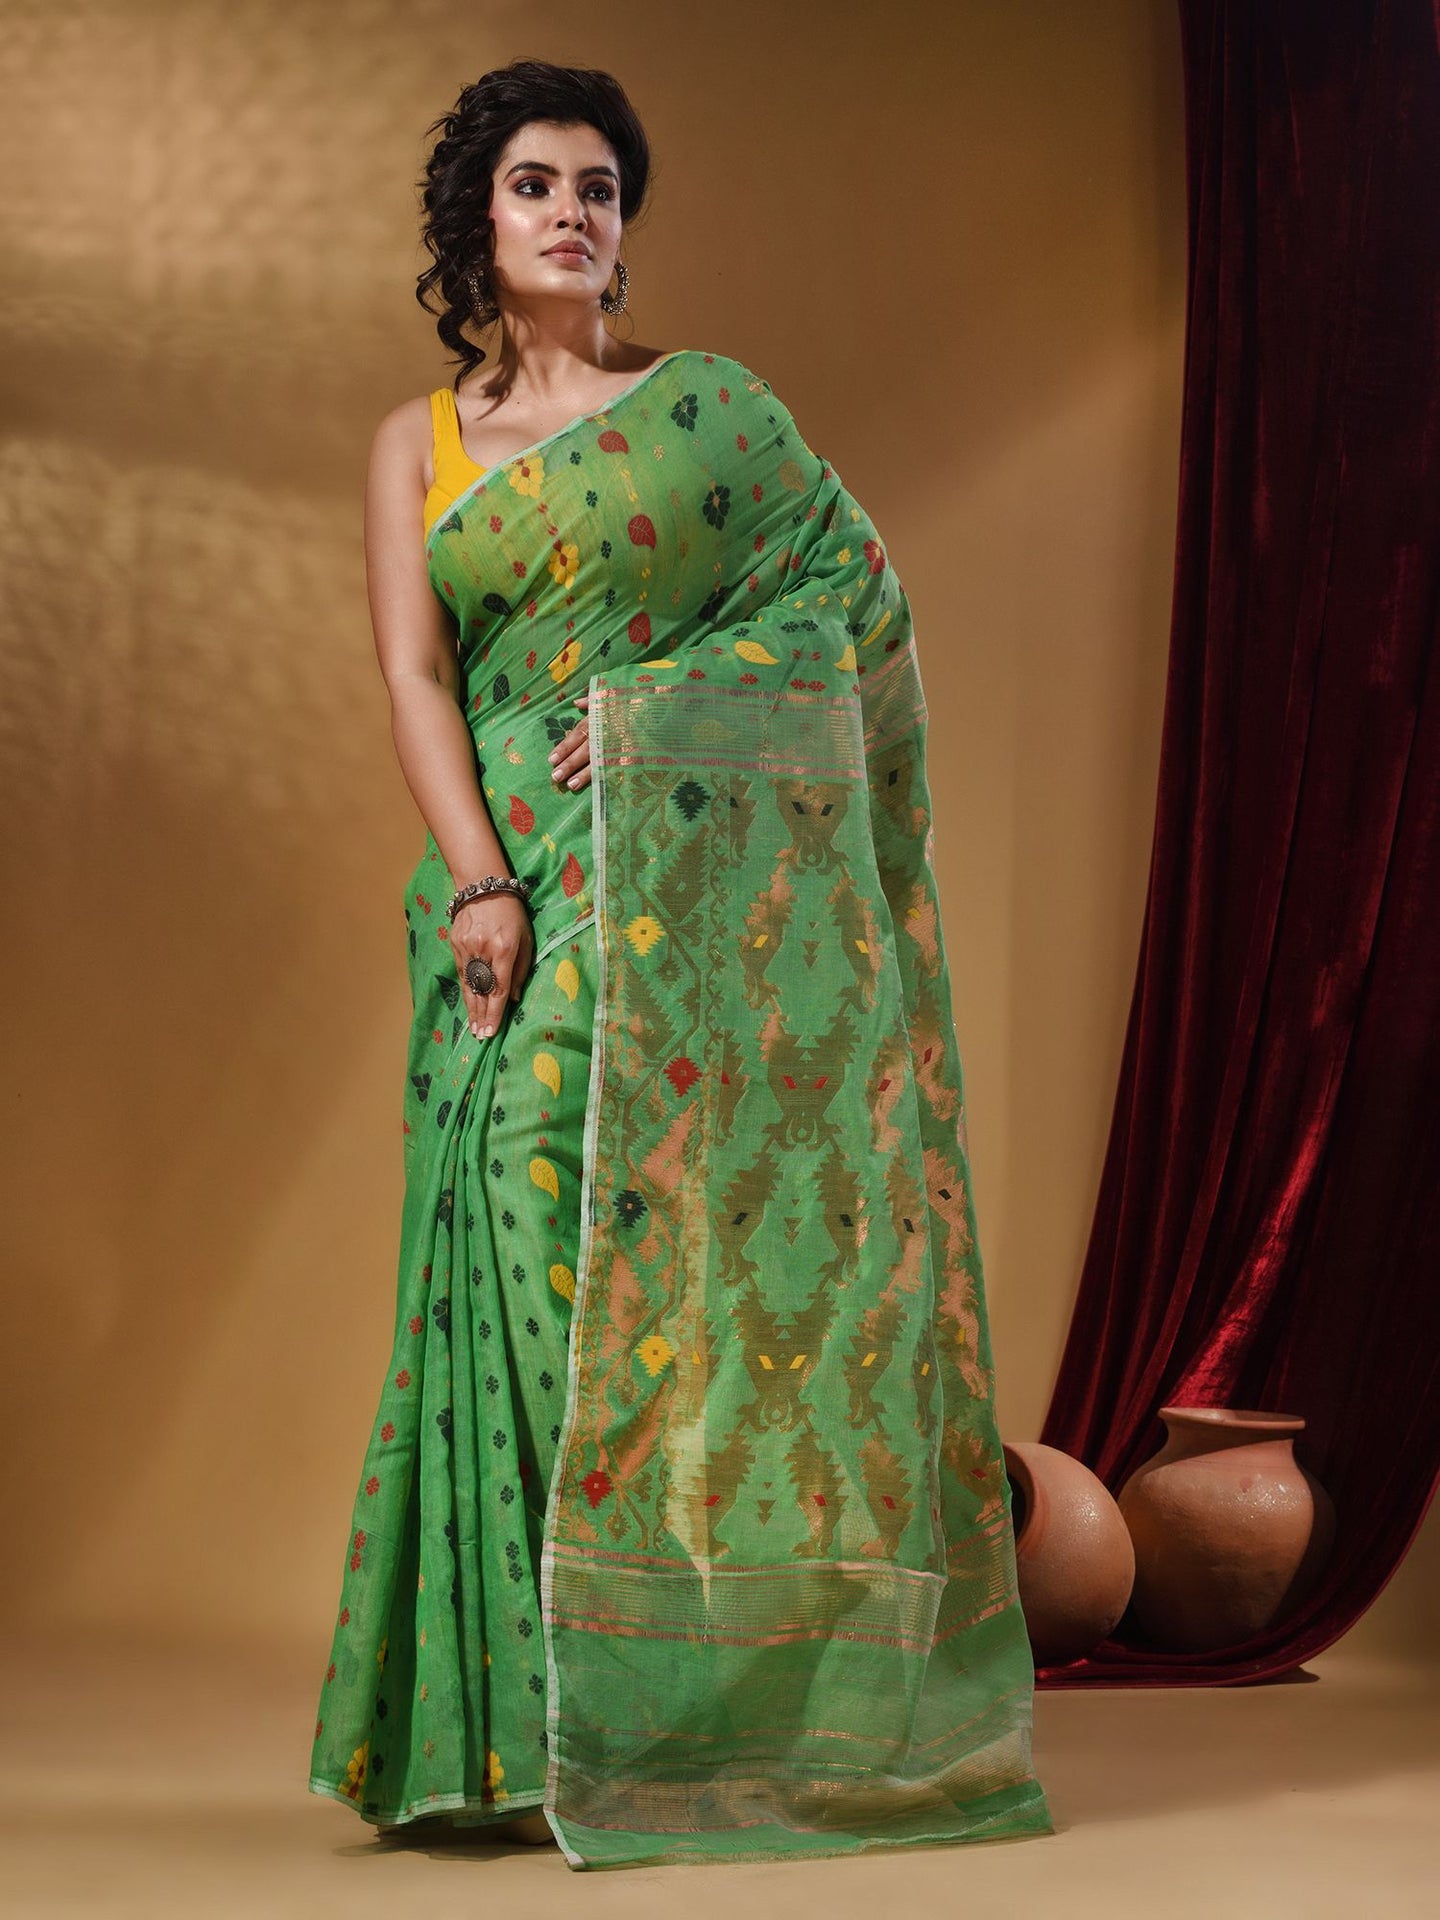 Fern Green Cotton Handwoven Jamdani Saree With Multicolor Woven Designs And Motifs